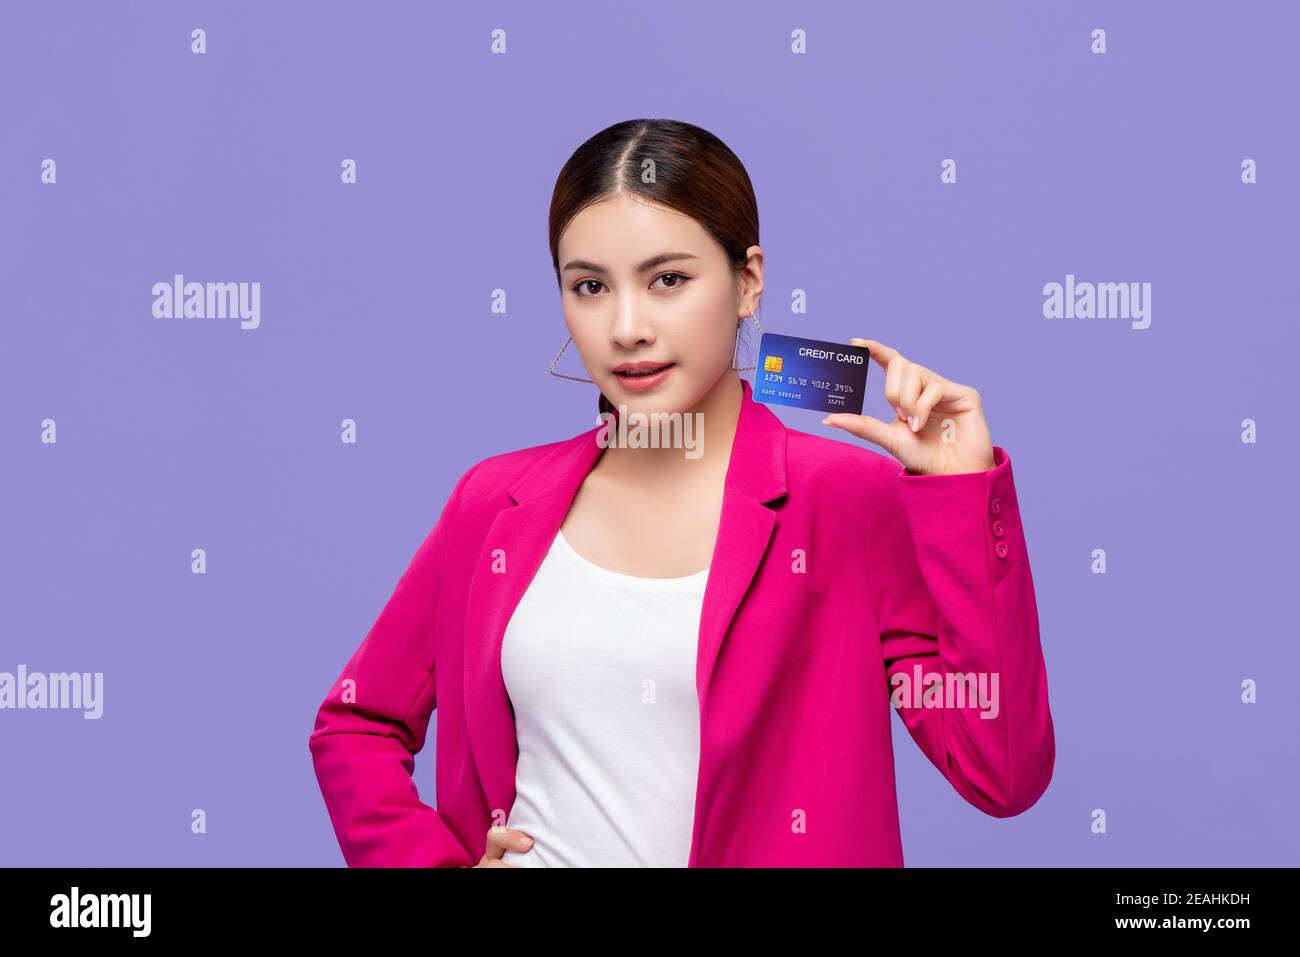 Beautiful Asian woman in colorful pink suit showing credit card in hand for financial and cashless society concepts Stock Photo